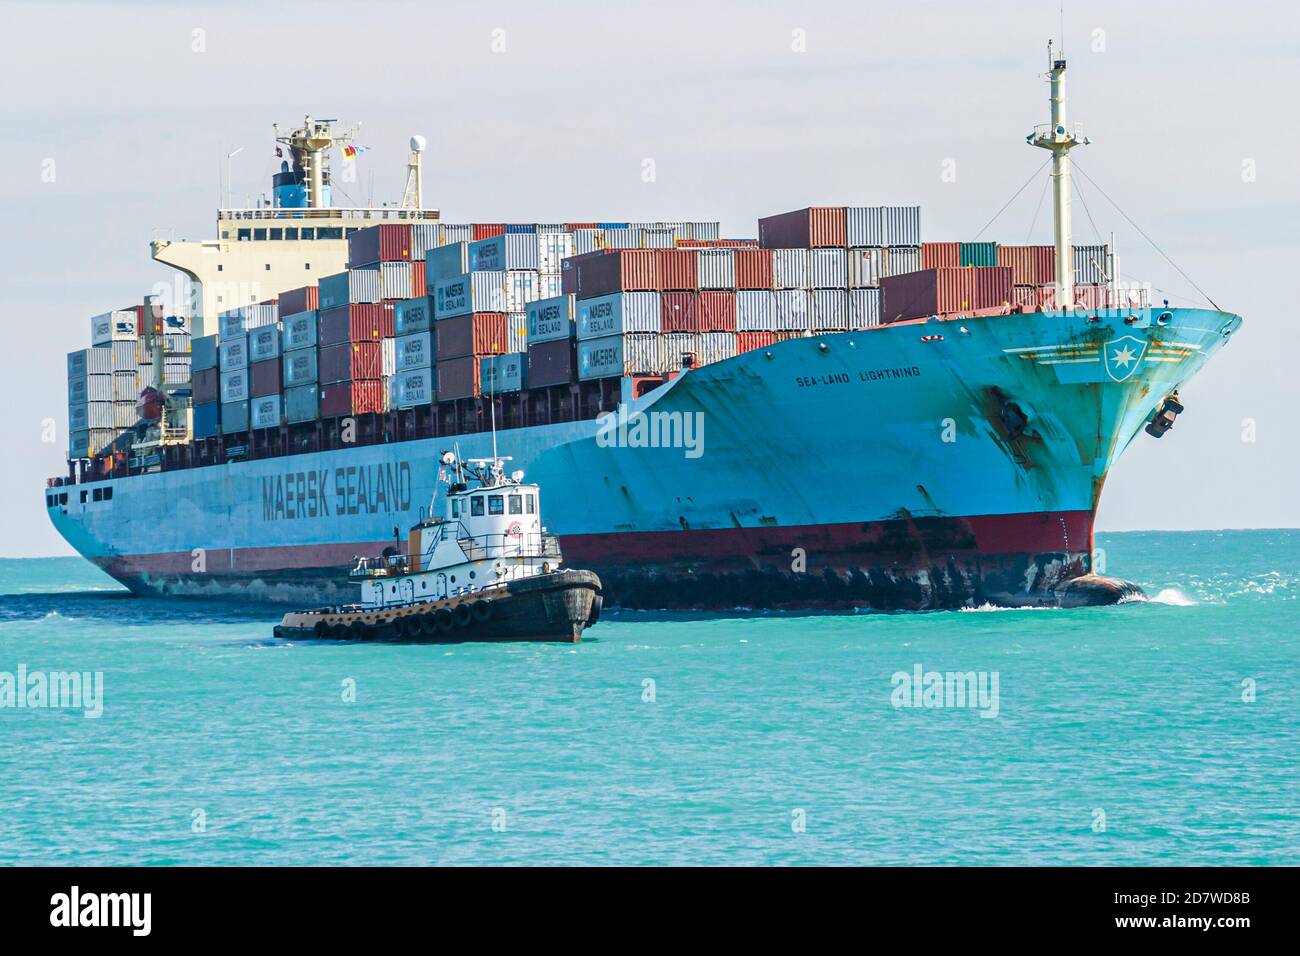 Miami Beach Florida,Atlantic Ocean cargo container ship loaded,approaches approaching arrives arriving Port of Miami tugboats, Stock Photo